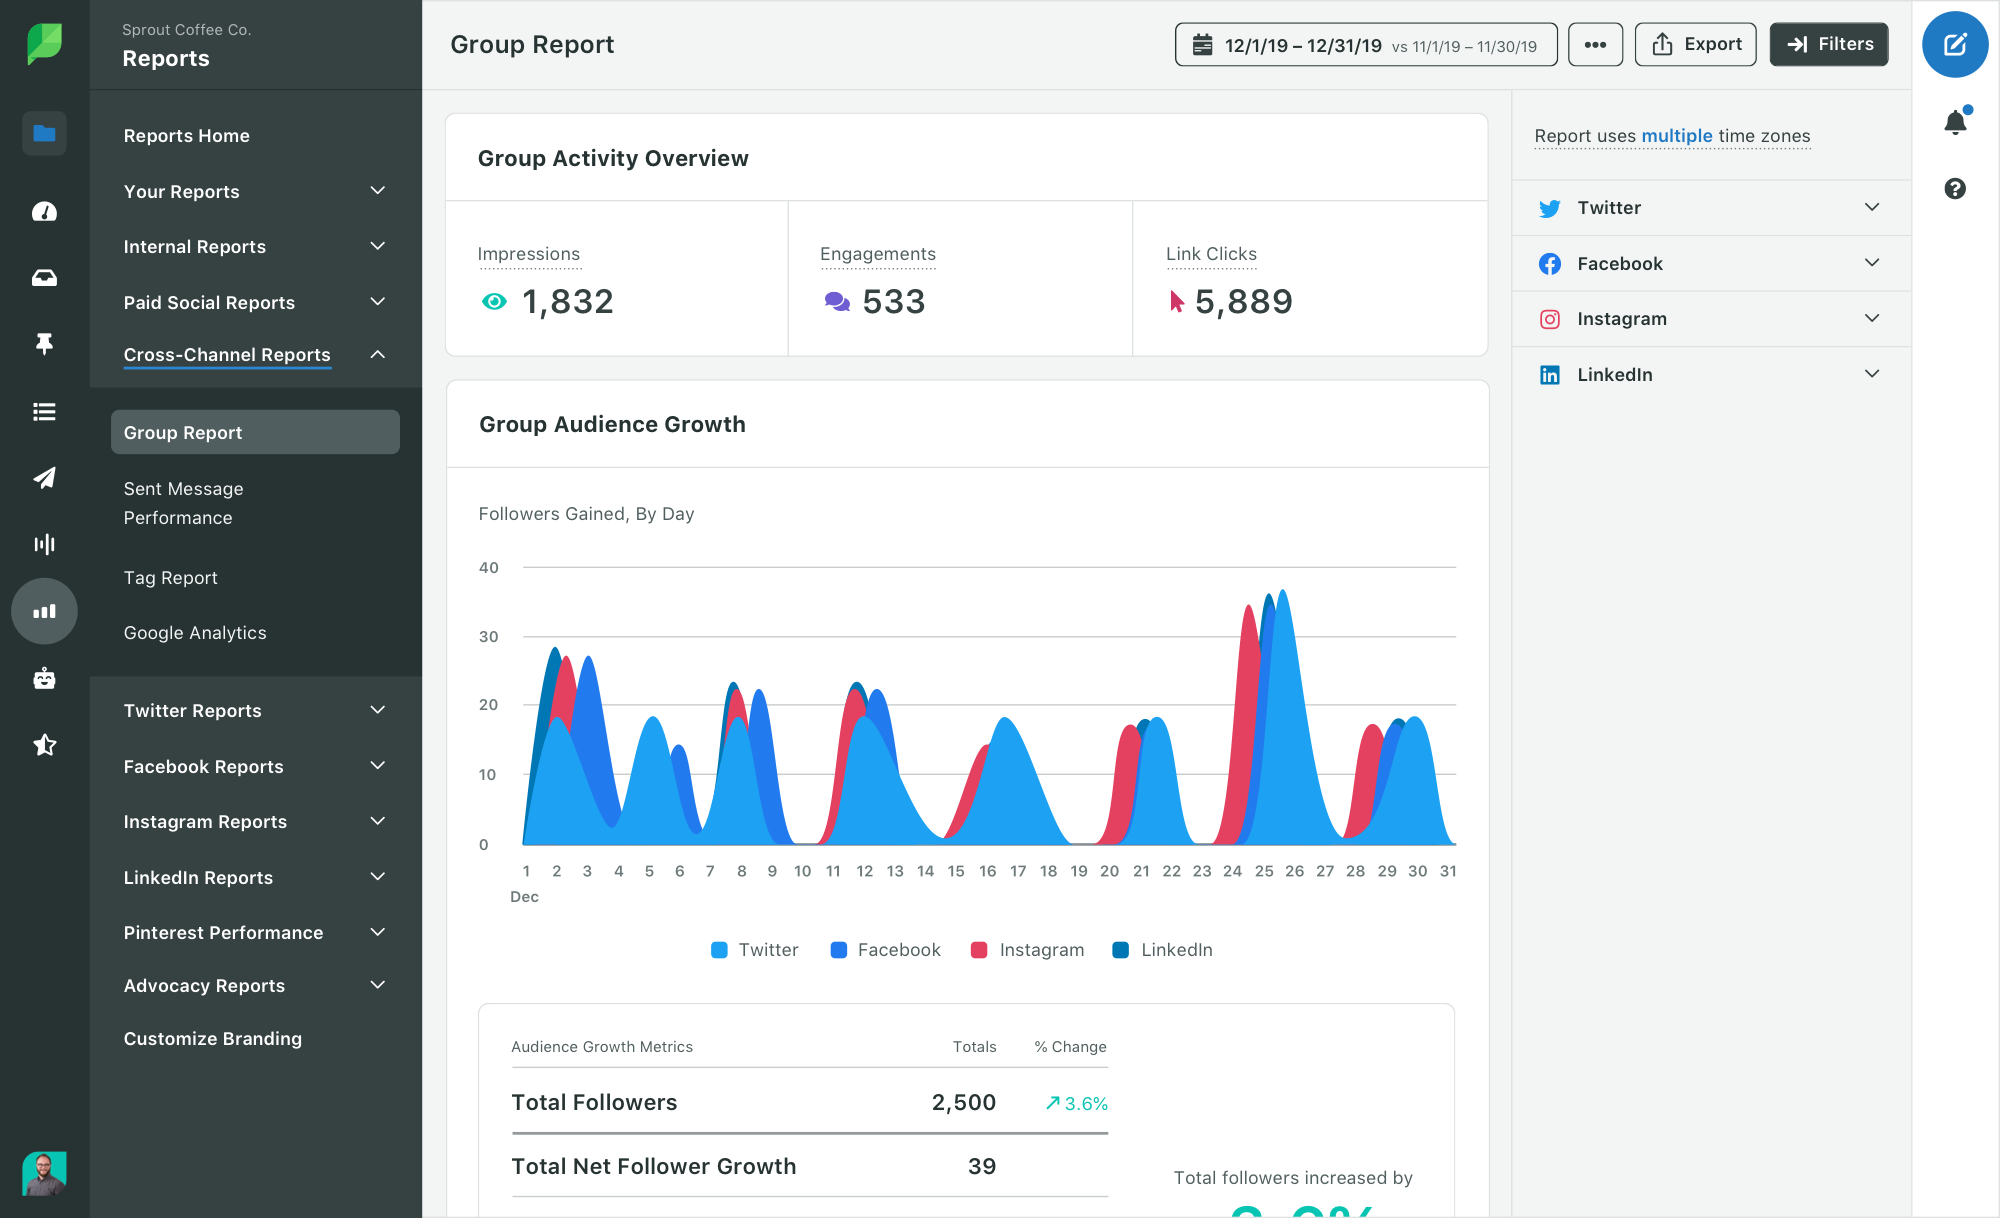 Sprout's cross channel group report helps you compare profile performance across network side by side.